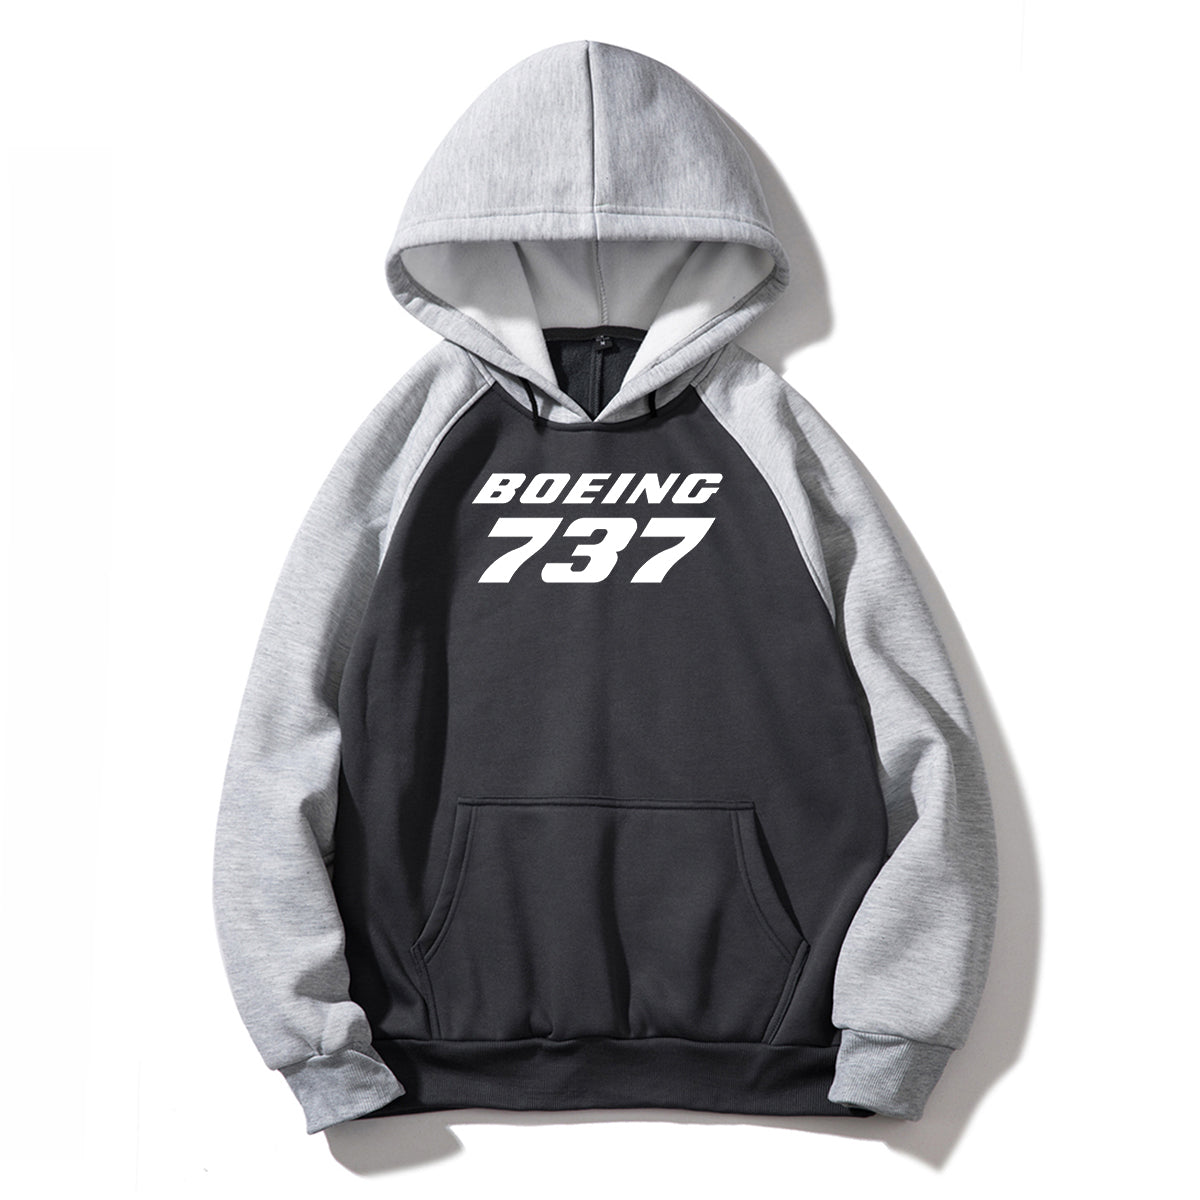 Boeing 737 & Text Designed Colourful Hoodies